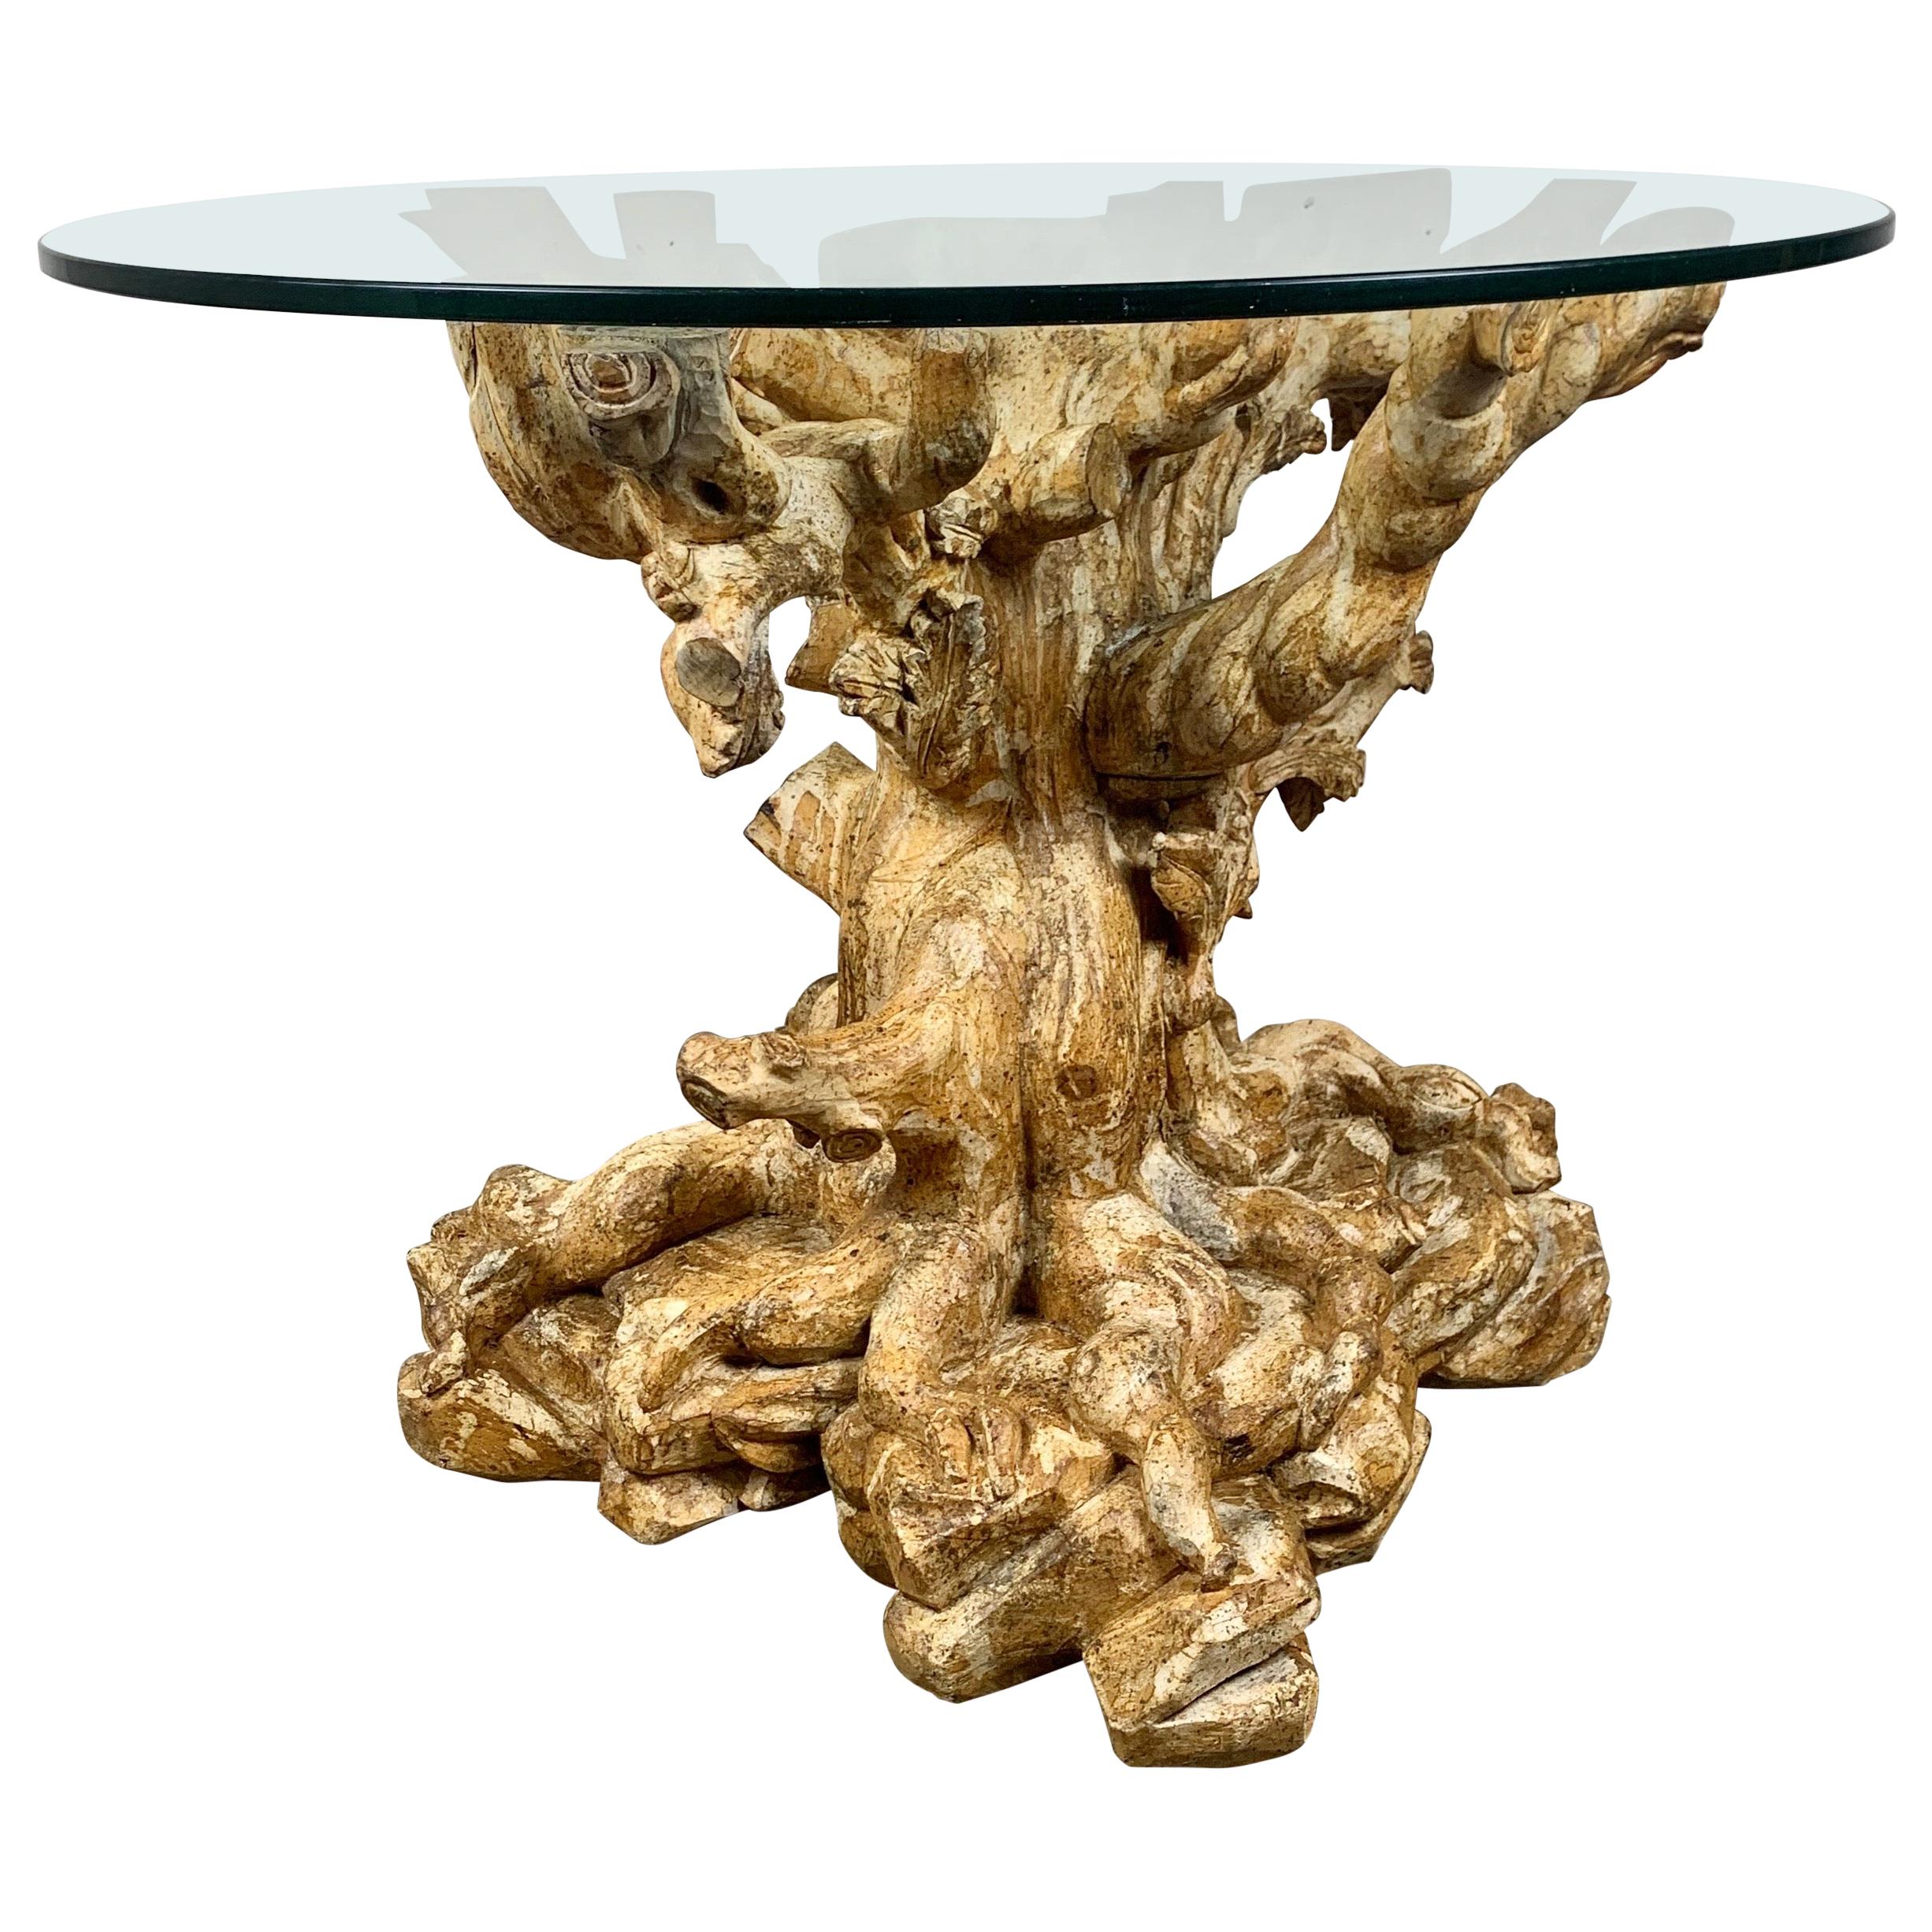 Unique Carved Wood Tree Trunk Table with Glass Top